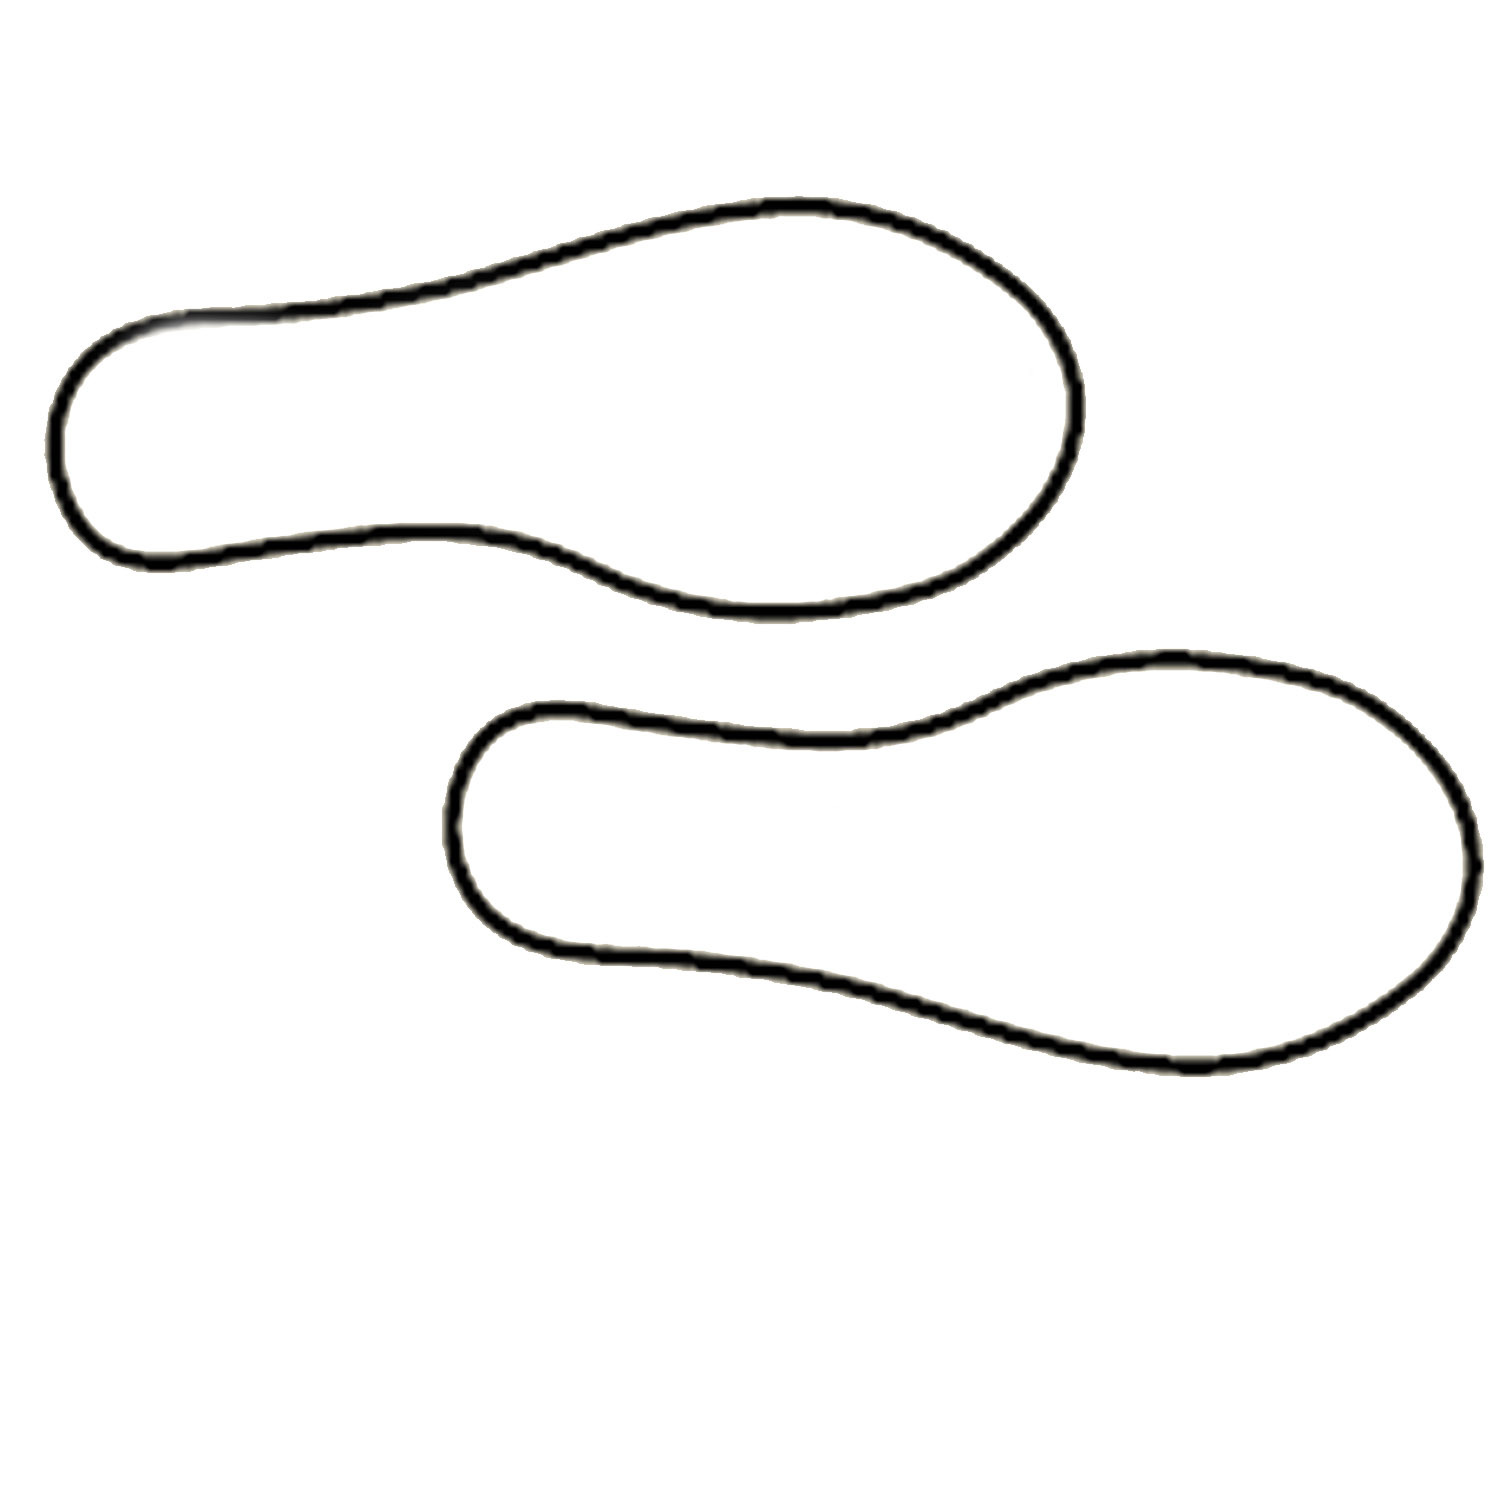 Foot outline clipart